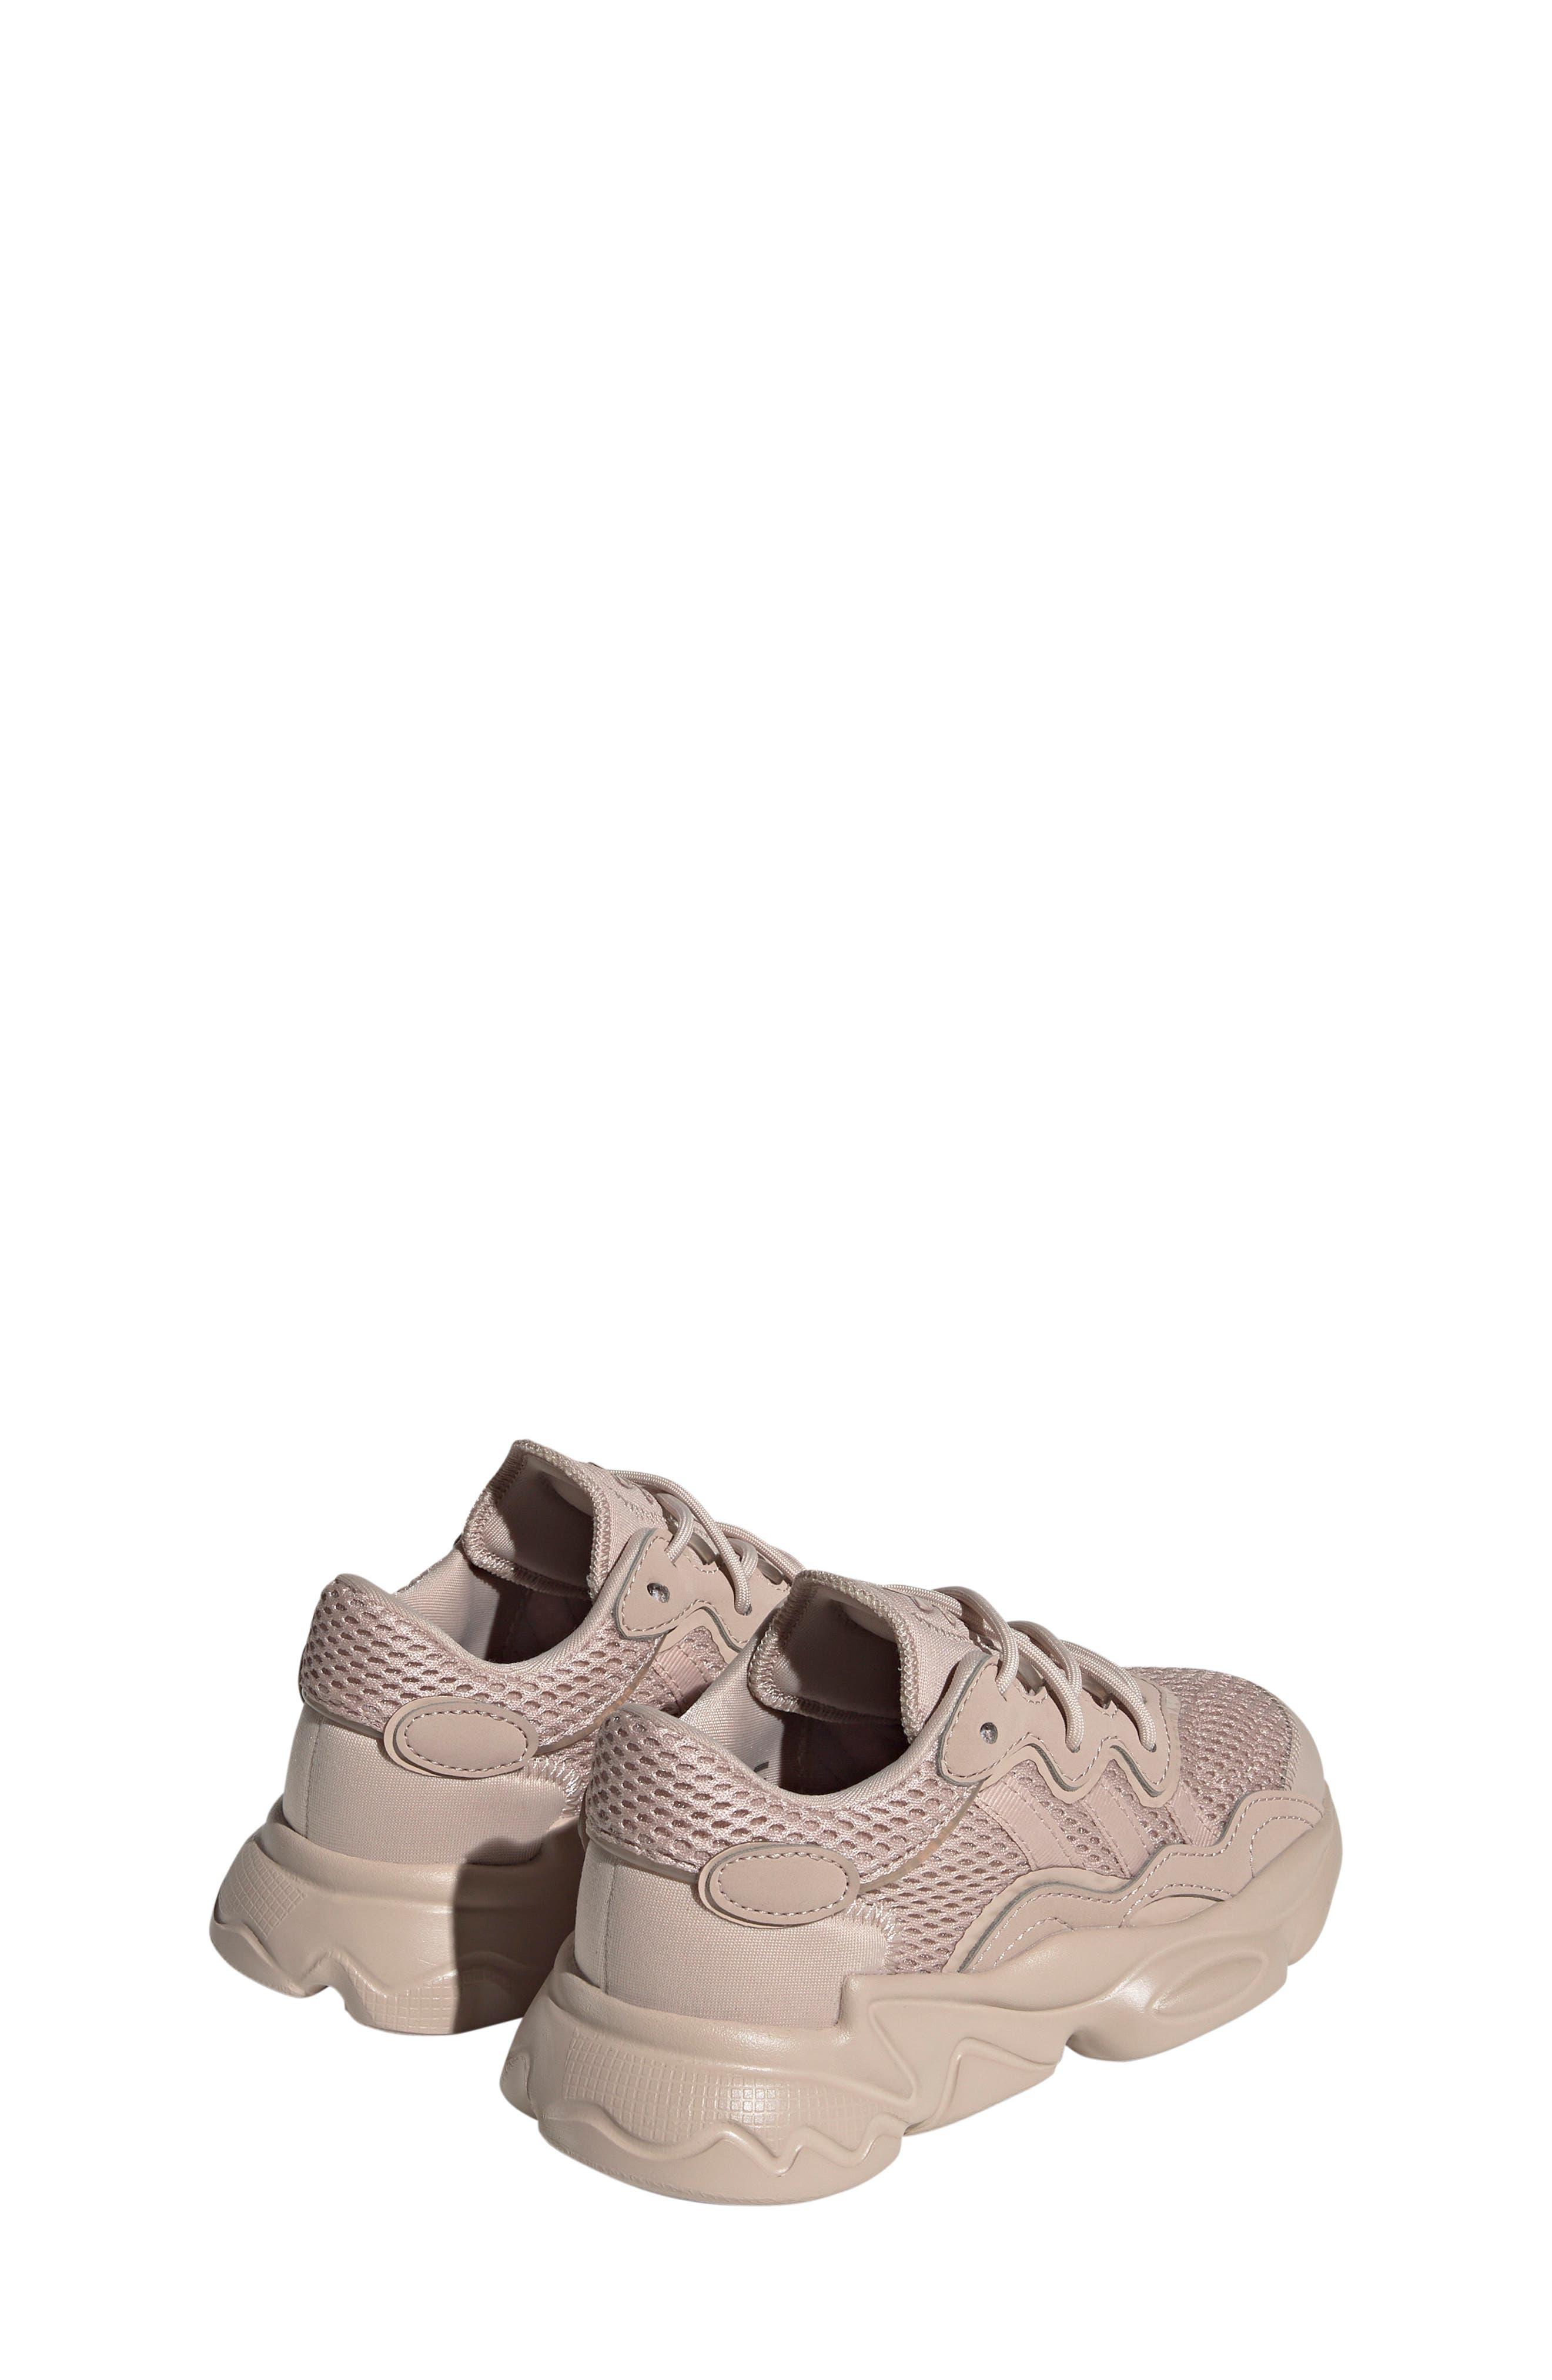 adidas Ozweego Sneaker in Pink | Lyst